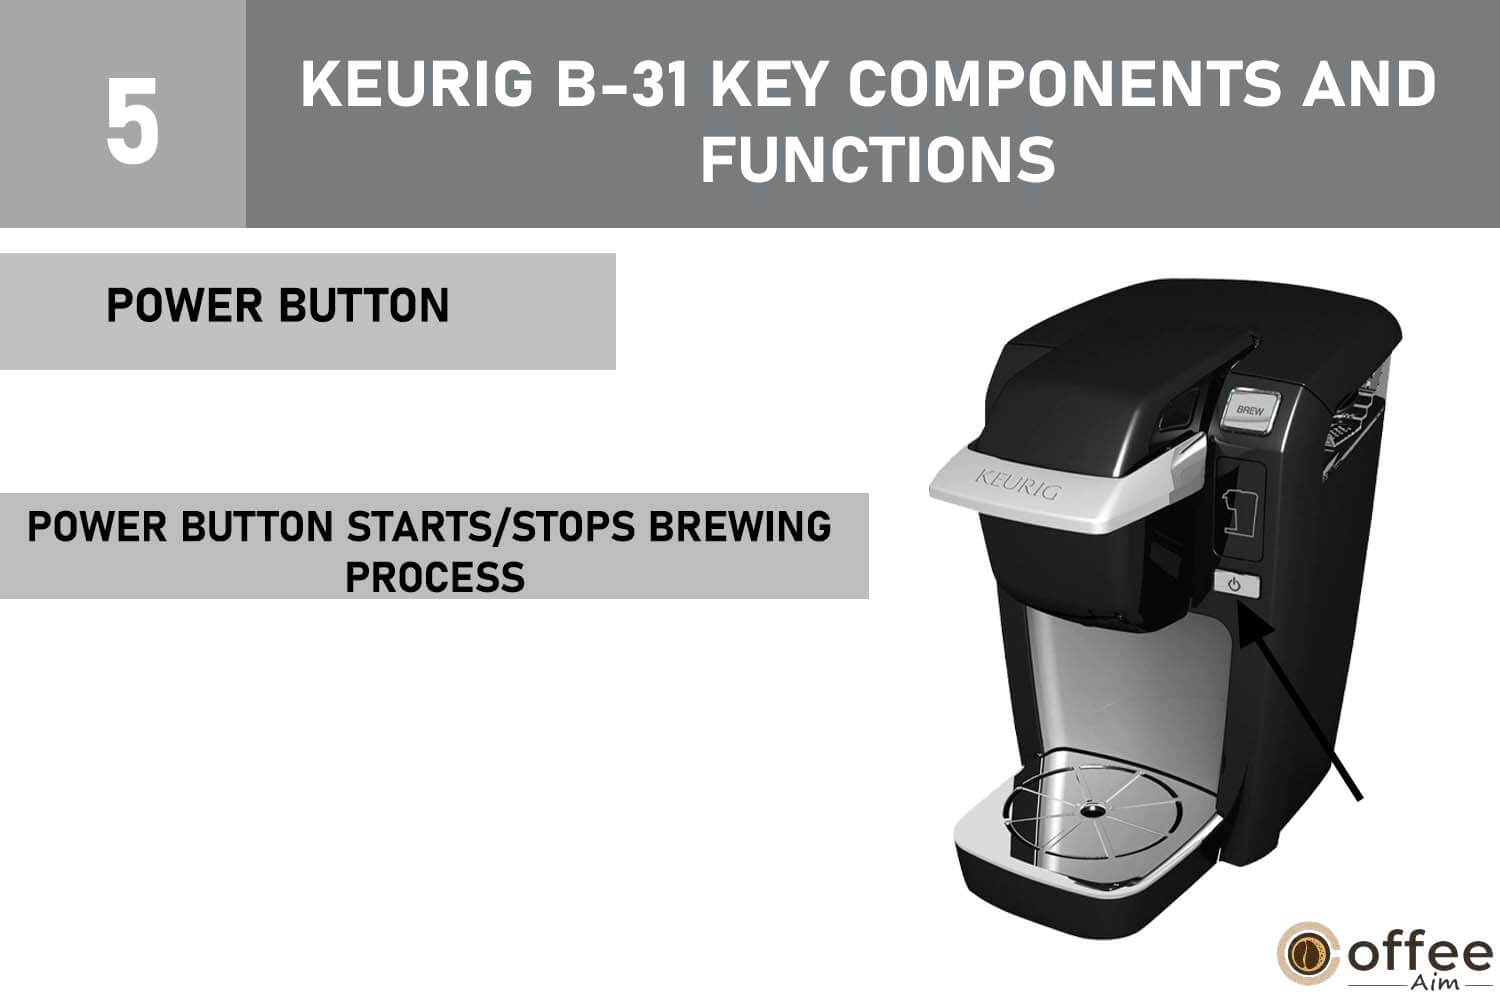 This image illustrates the 'Power Button' component of the Keurig B-31 coffee maker, featured in the article 'How To Use Keurig B-31'.